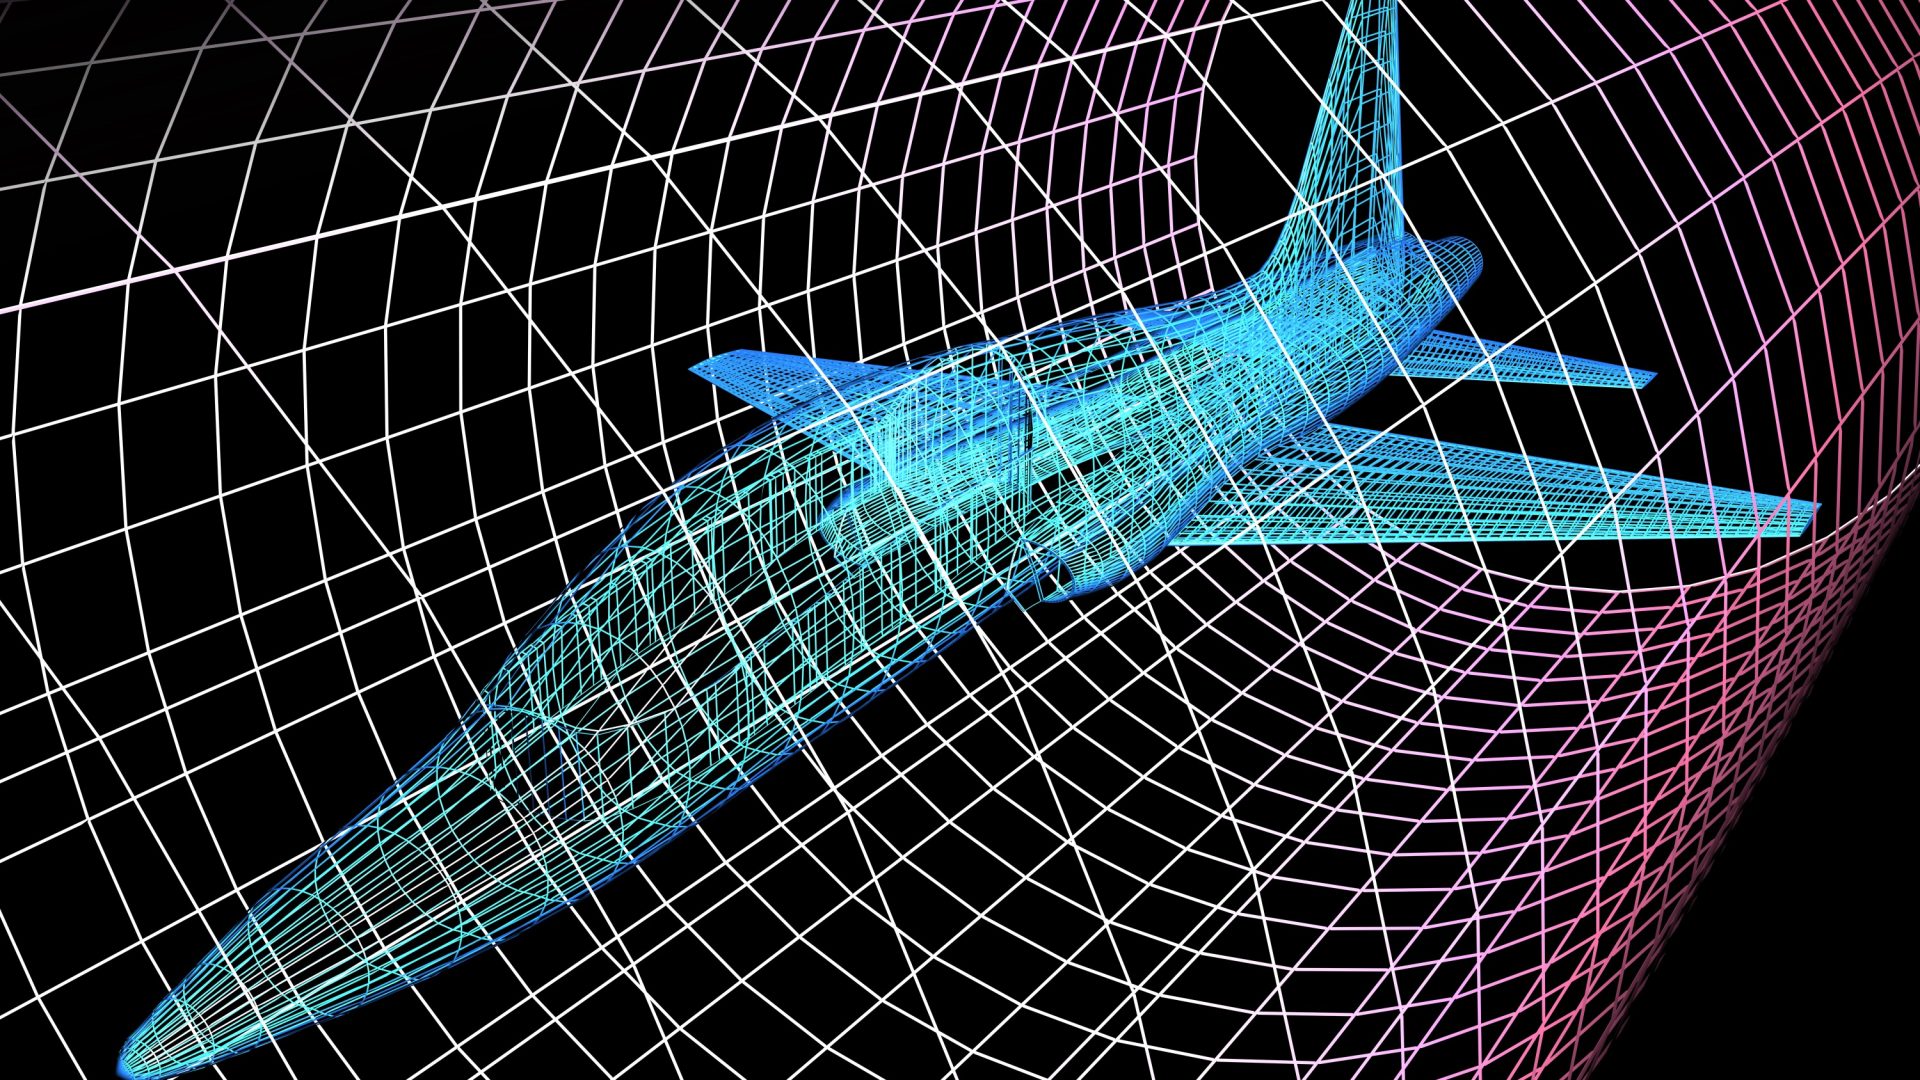 wireframe aircraft